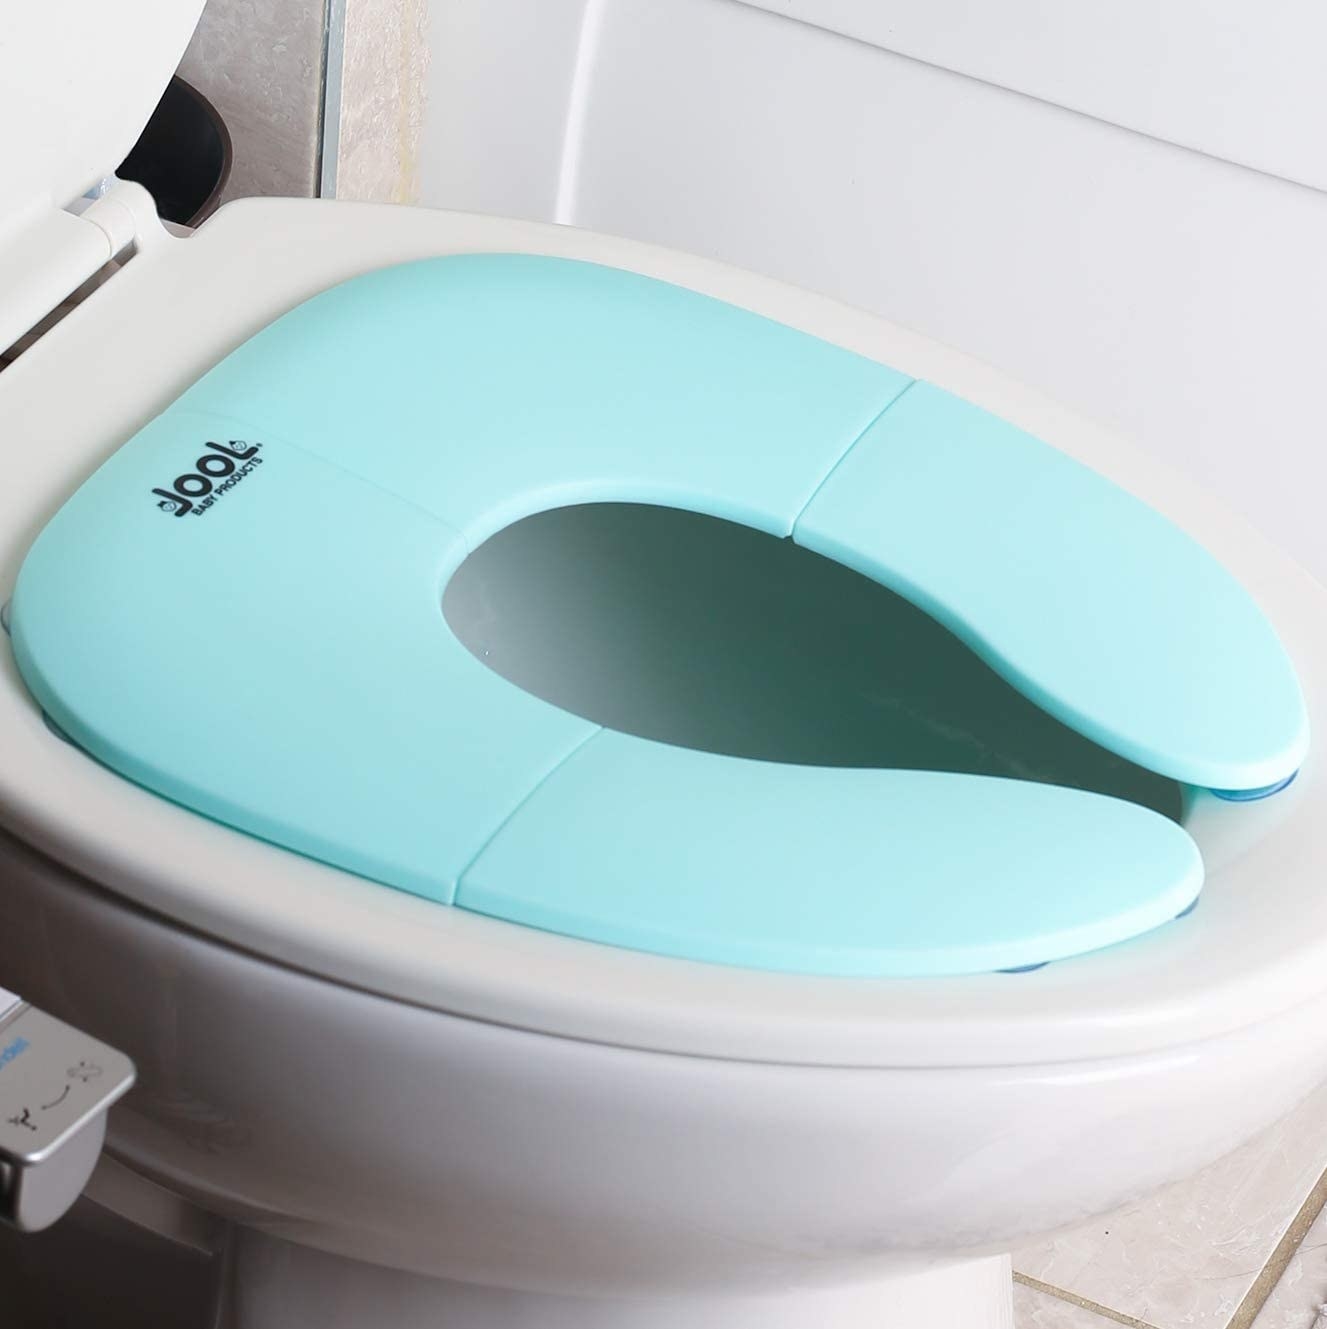 The seat on a toilet